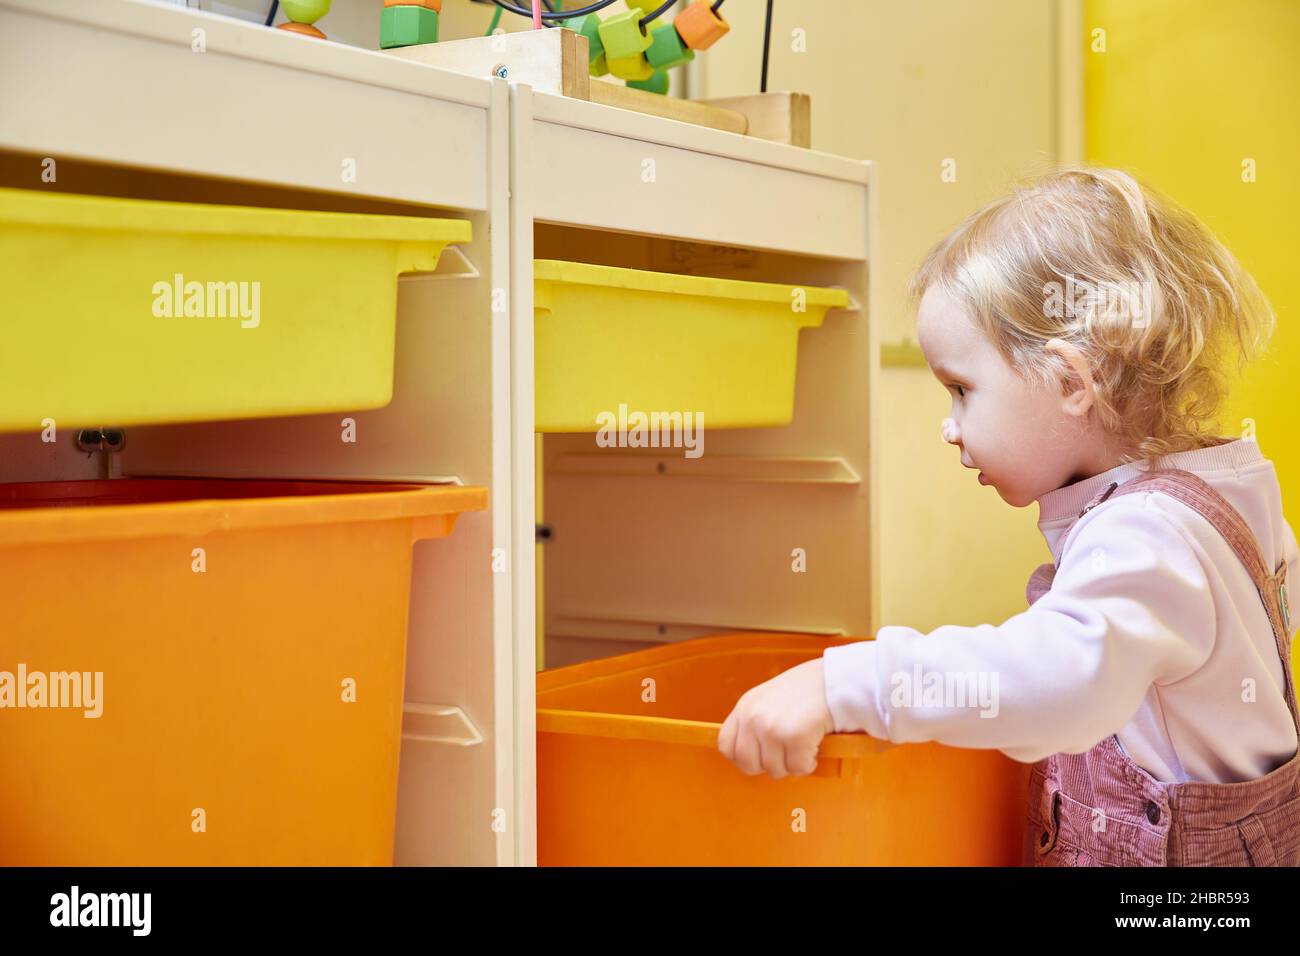 Toy storage system. The child puts the color box in the rack. Stock Photo